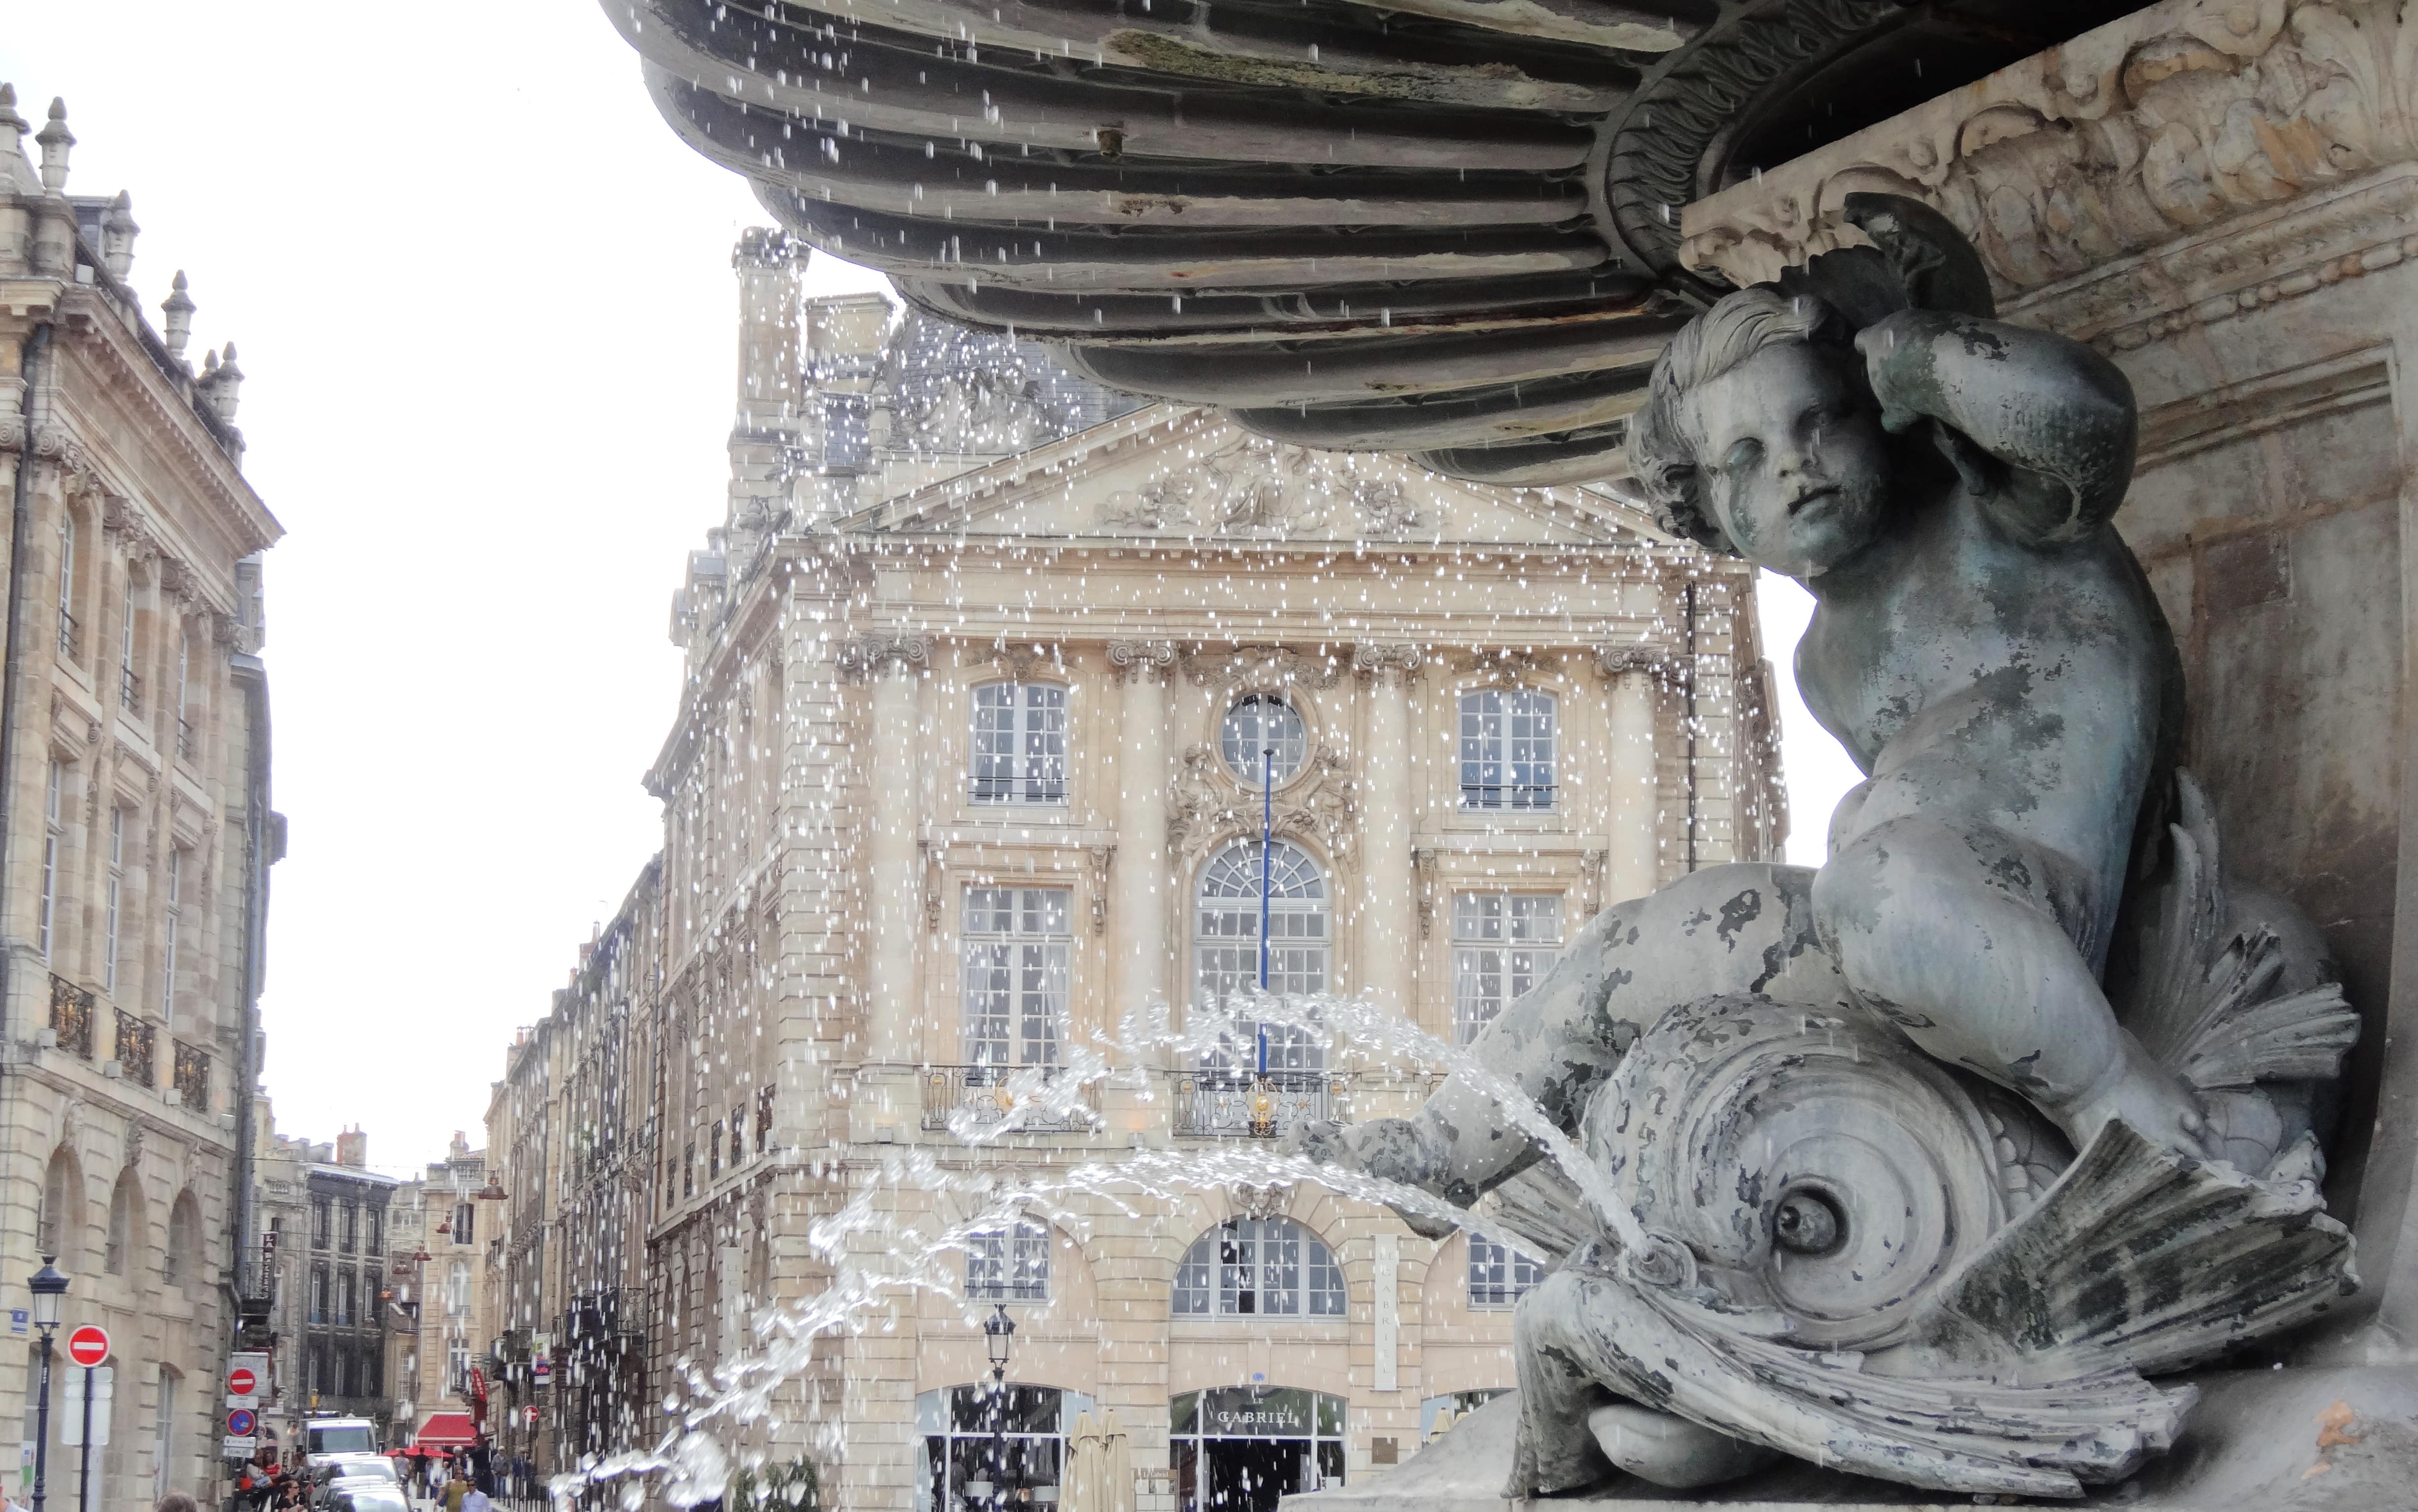 Bordeaux is one of the best holiday destinations in Europe for food and wine lovers